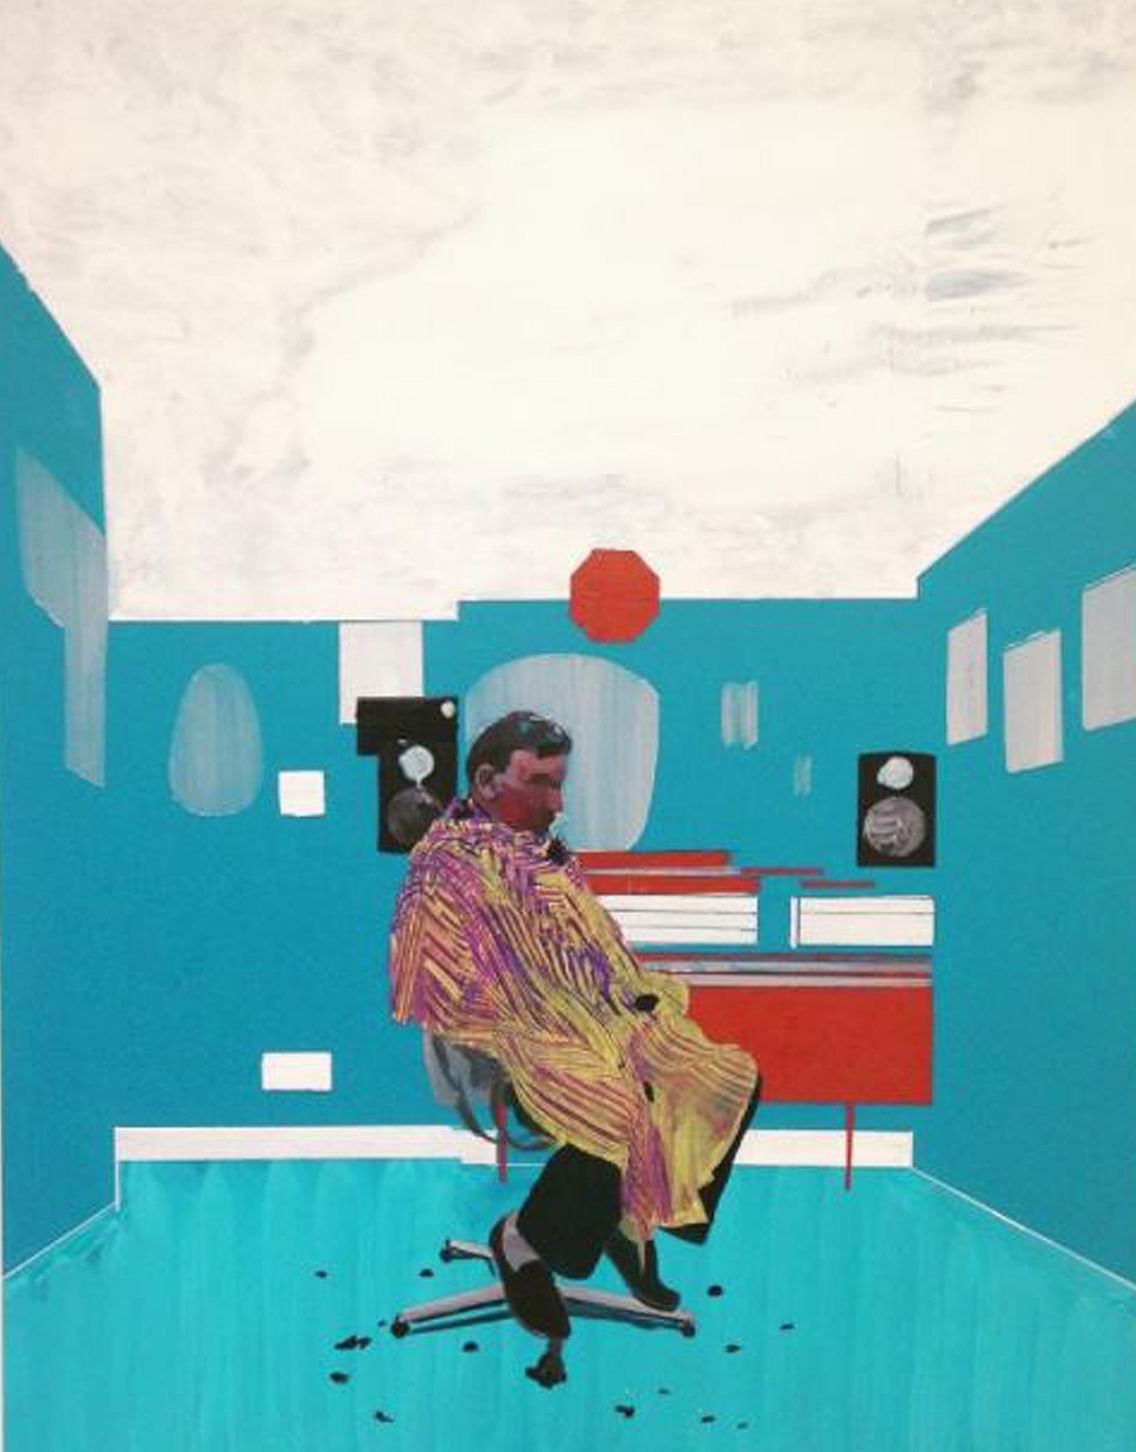 Peter's Sitter's III by Hurvin Anderson, 52, one of the four nominees for the Turner Prize.